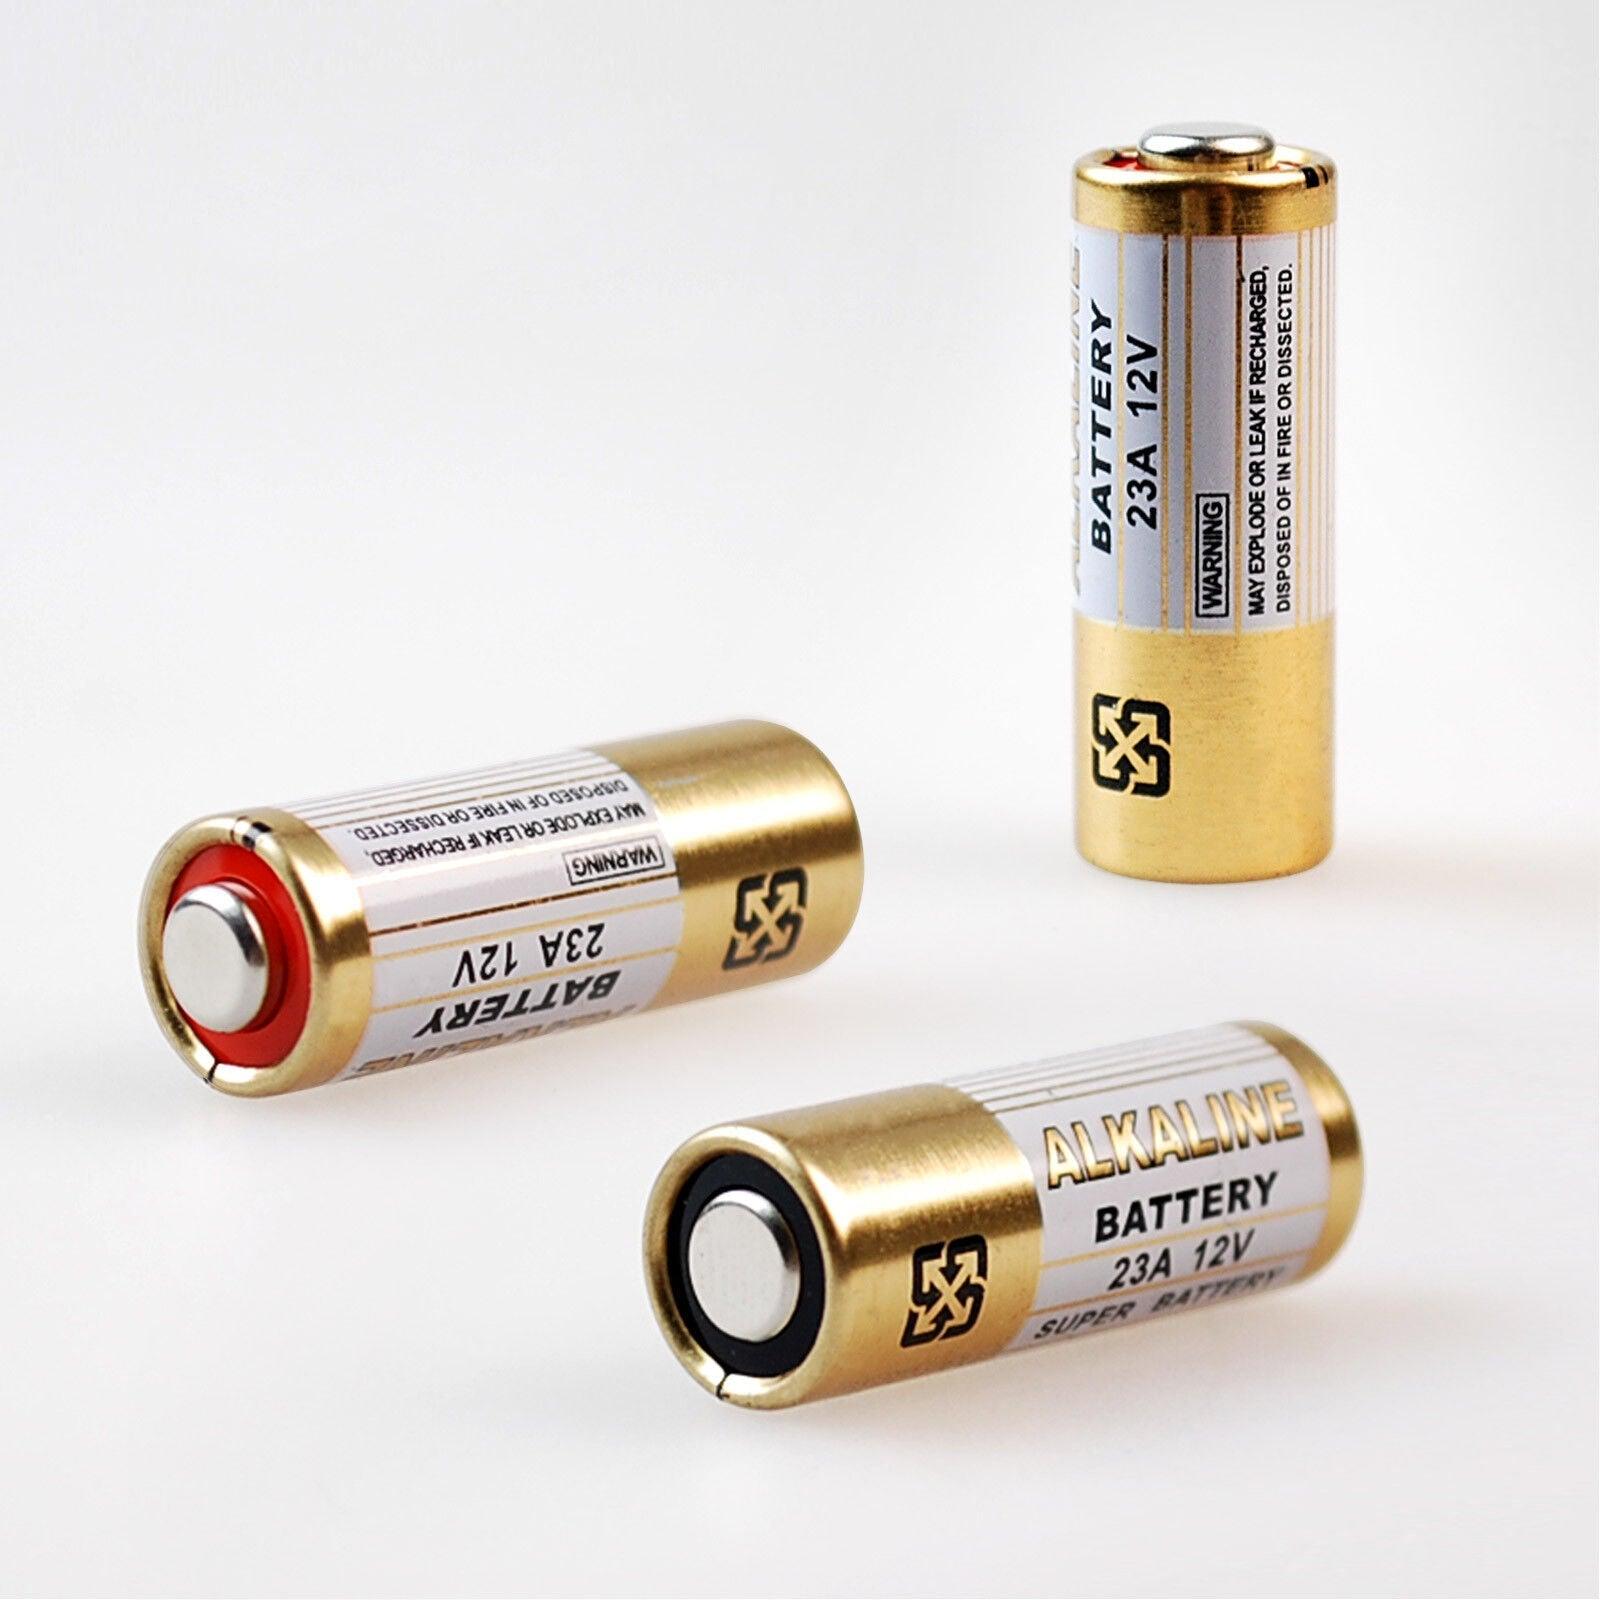 5 x A23/23A/8LR932 12V Powercell Alkaline Battery Batteries for Alarm/Remote - The Remote Factory